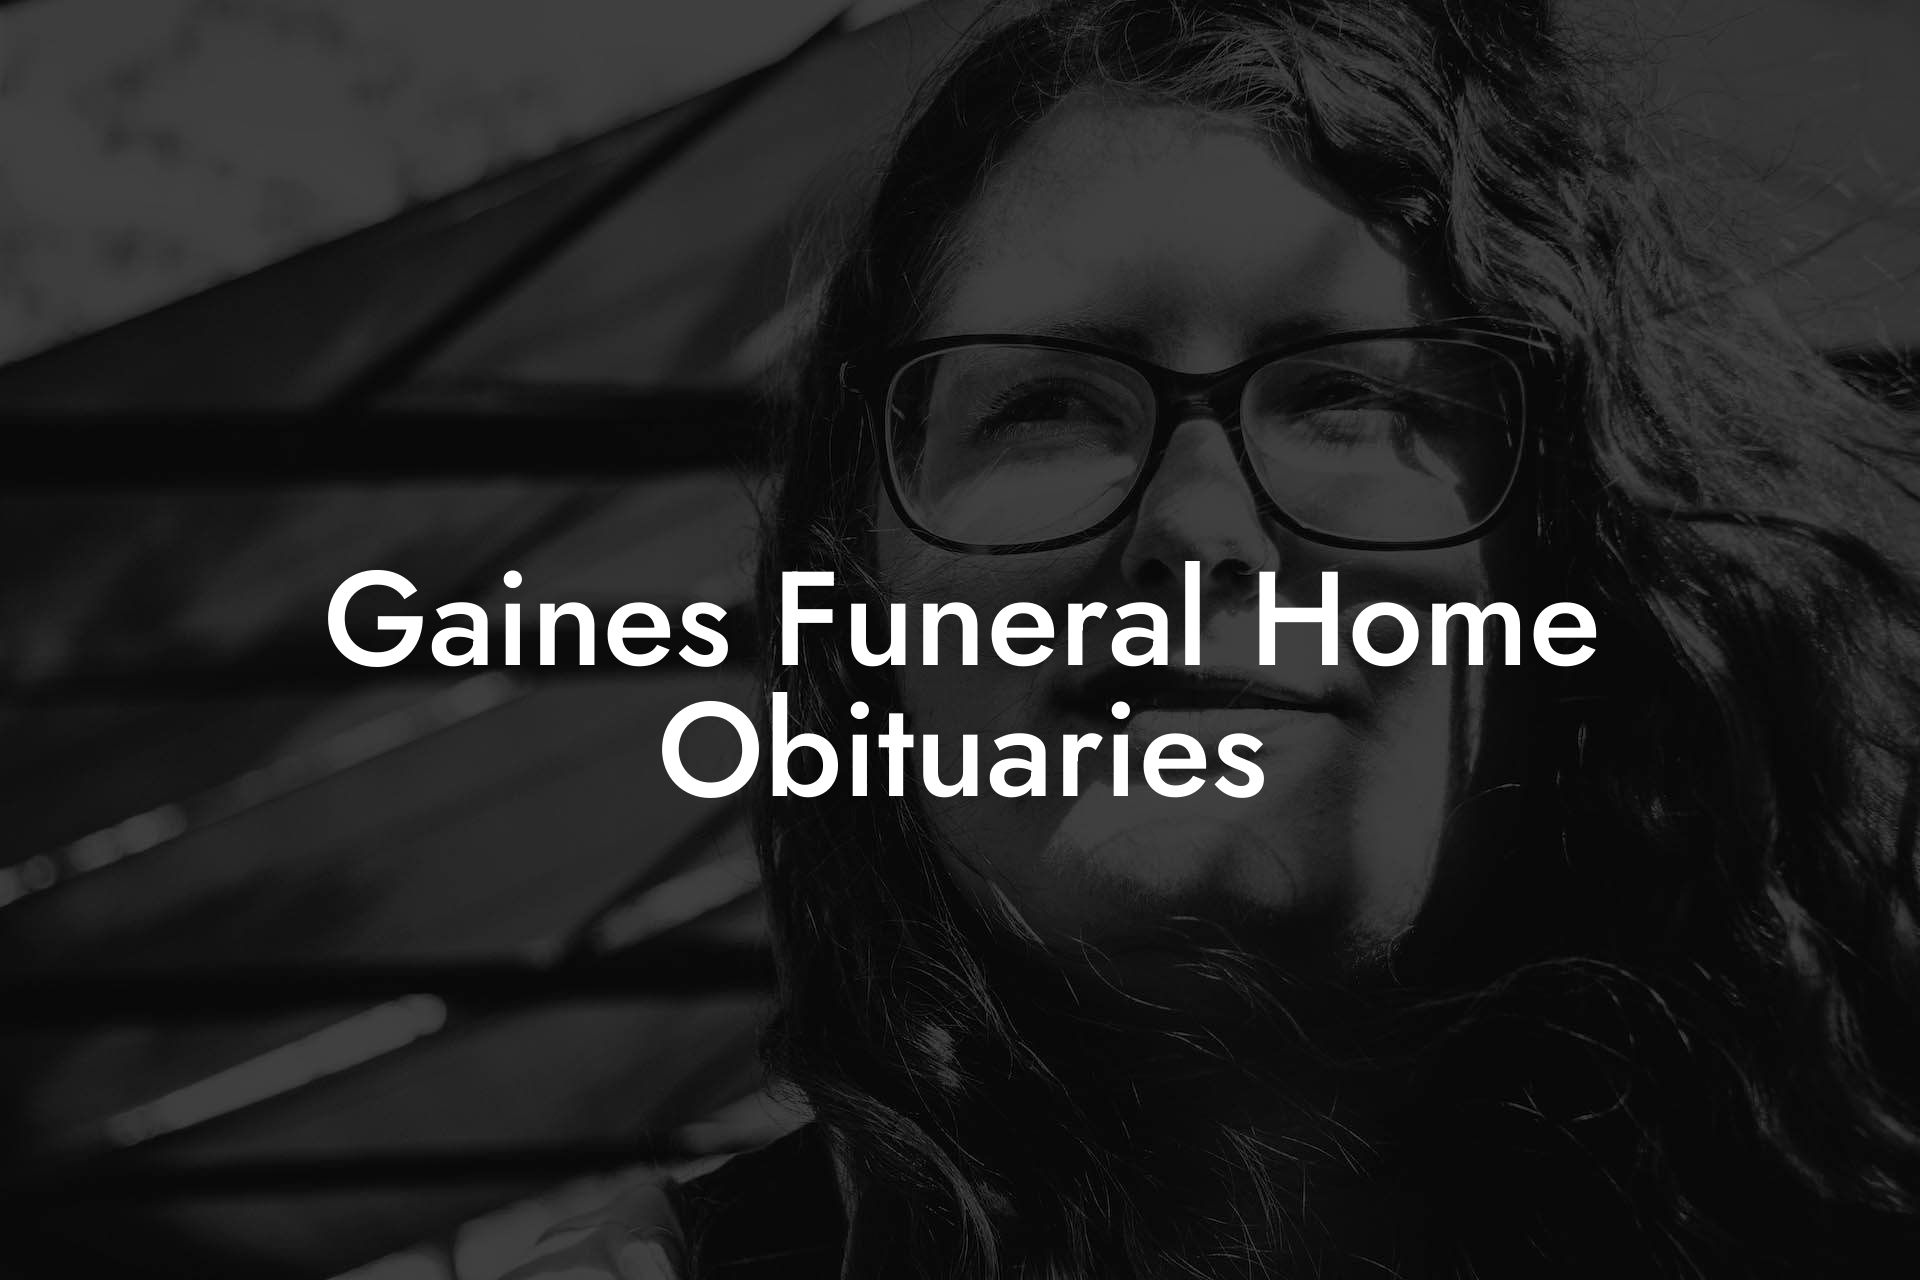 Gaines Funeral Home Obituaries